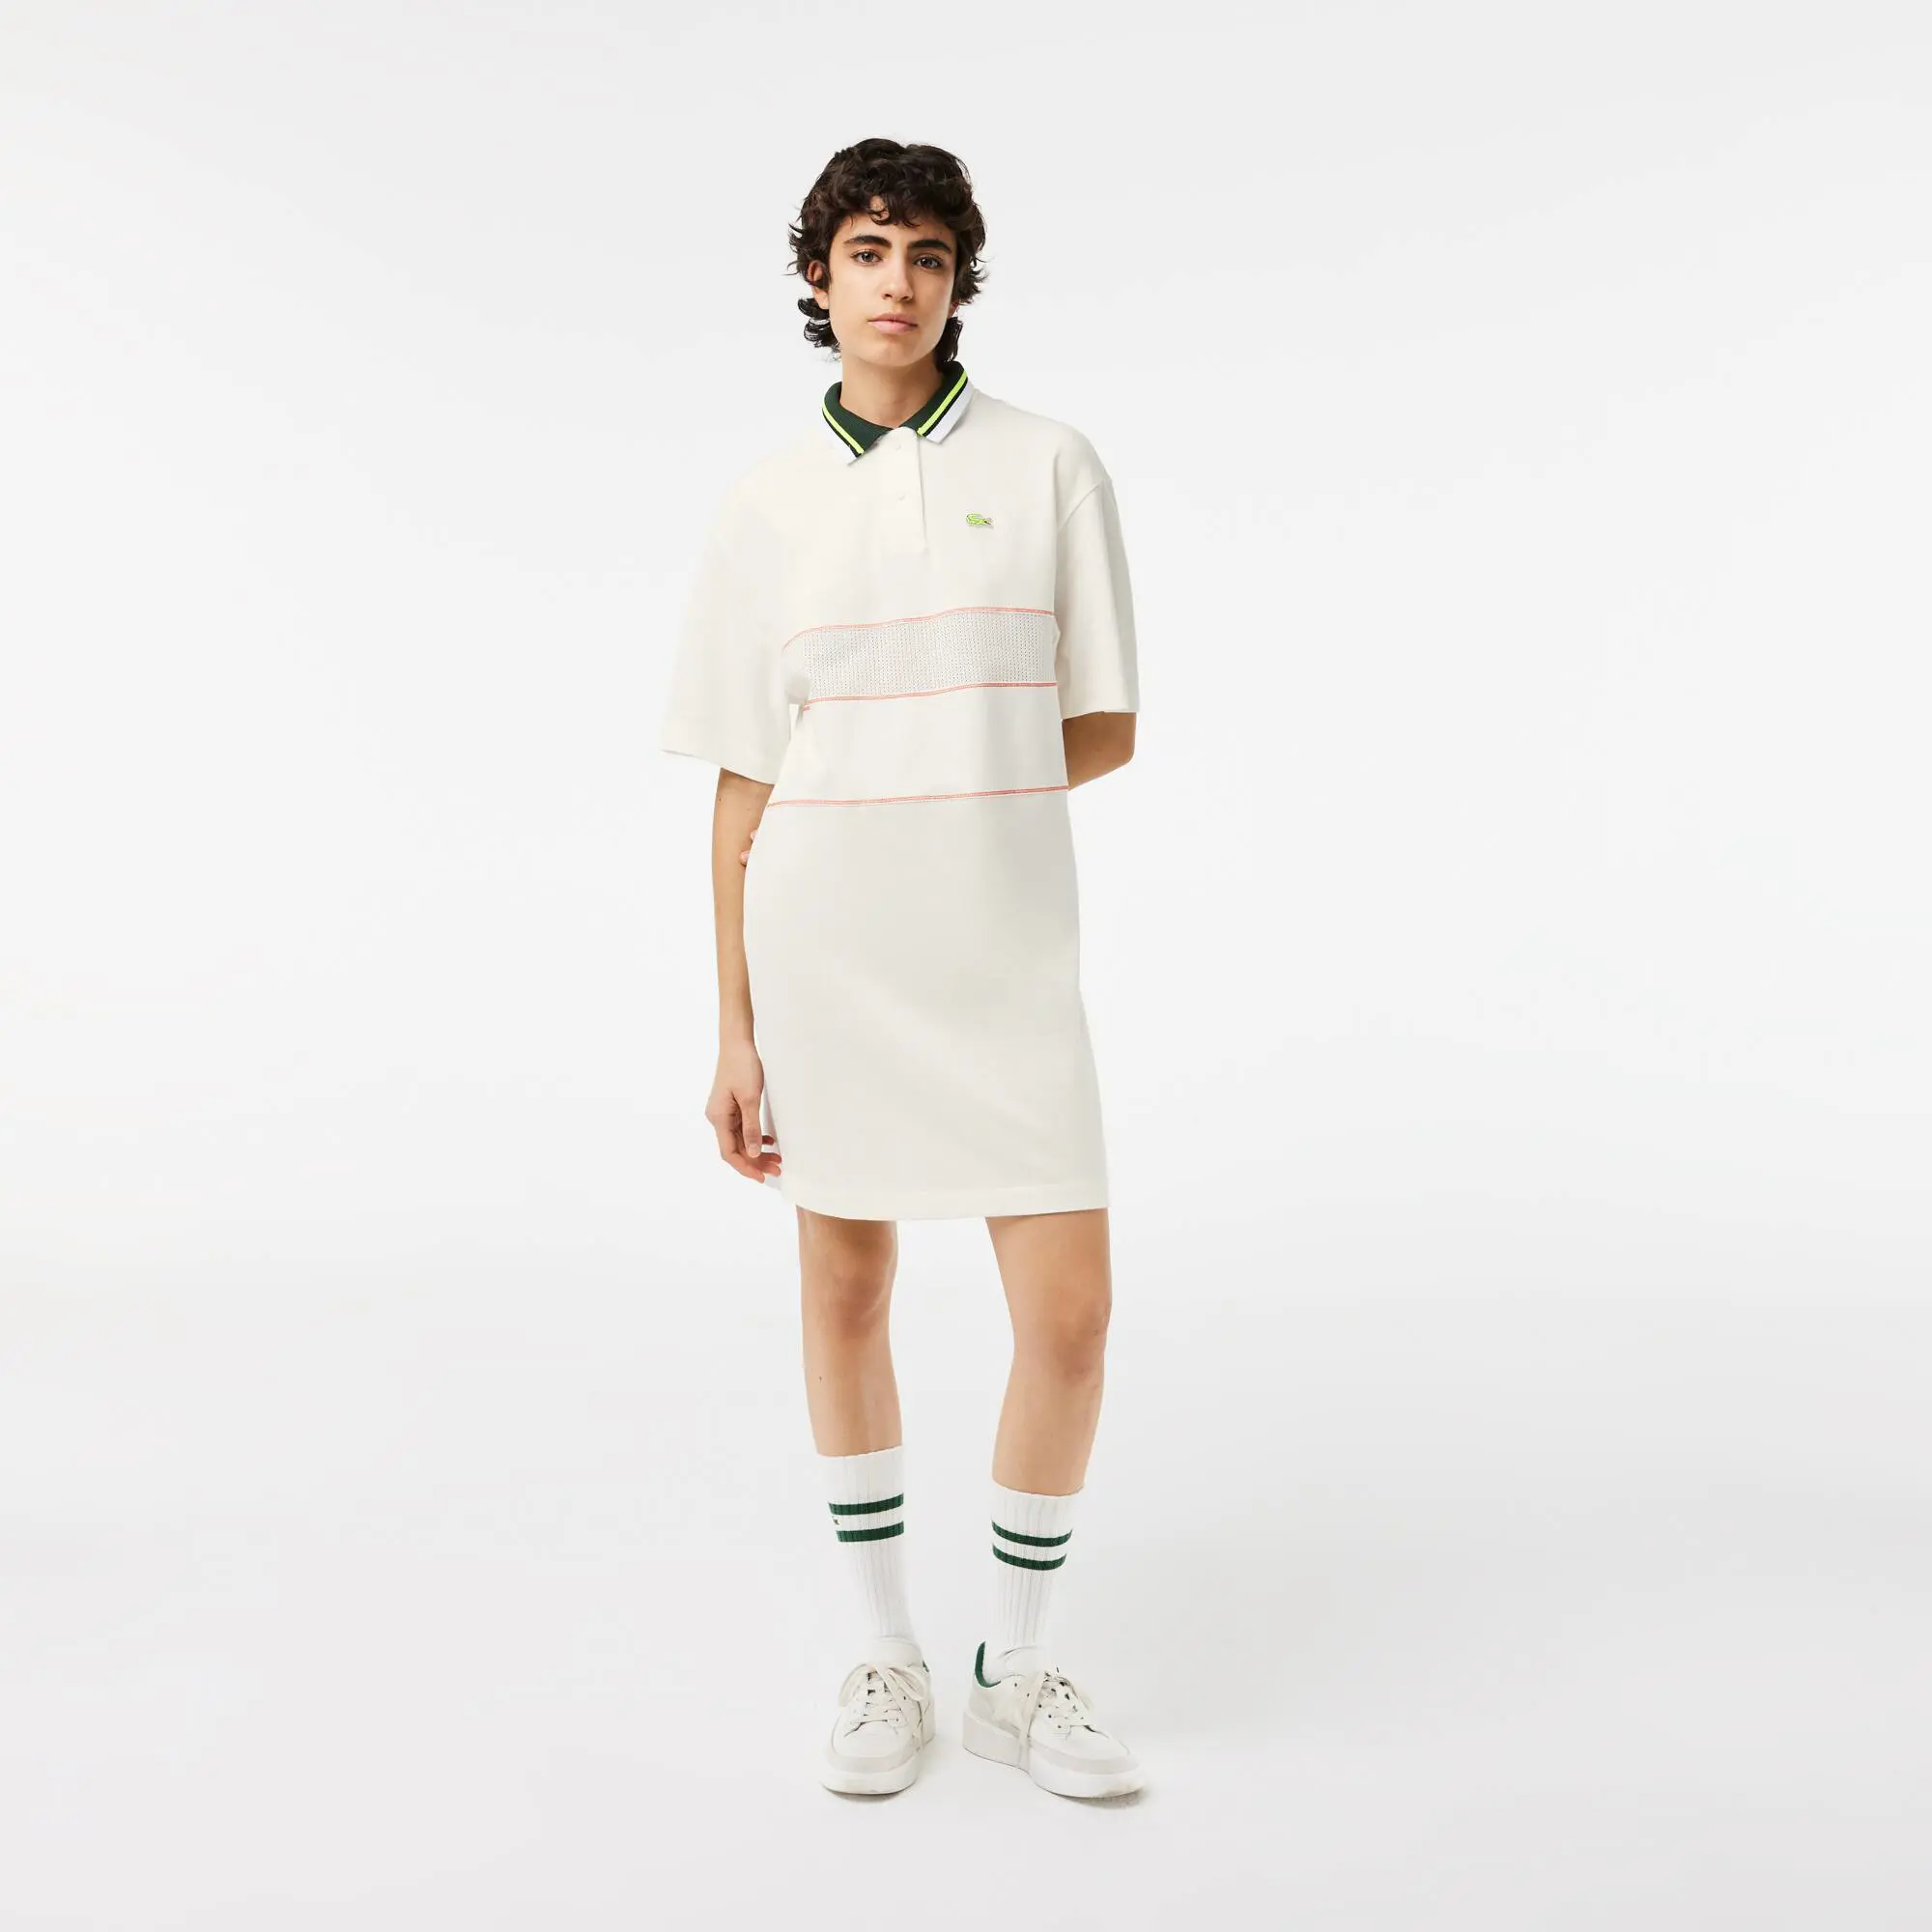 Lacoste Women’s Lacoste Organic Cotton French Made Polo Dress. 1